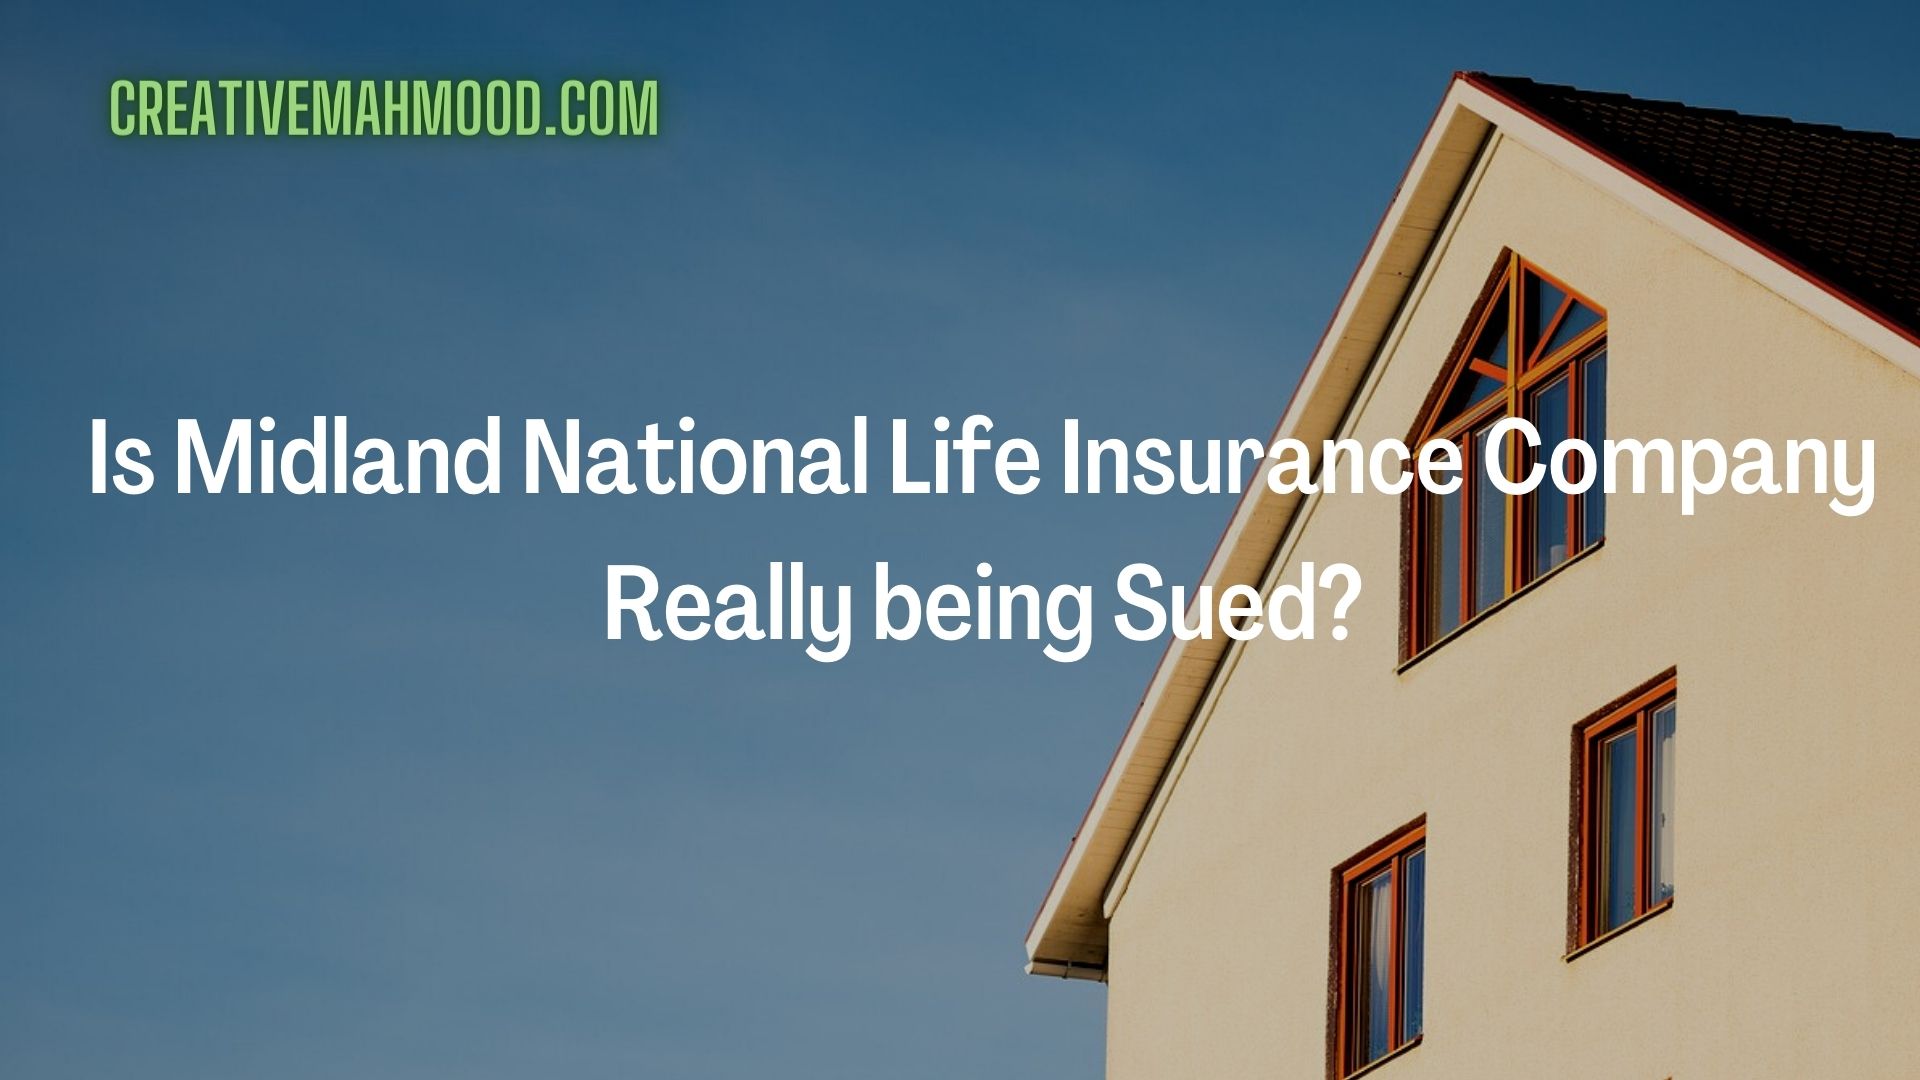 Is Midland National Life Insurance Company Really being Sued